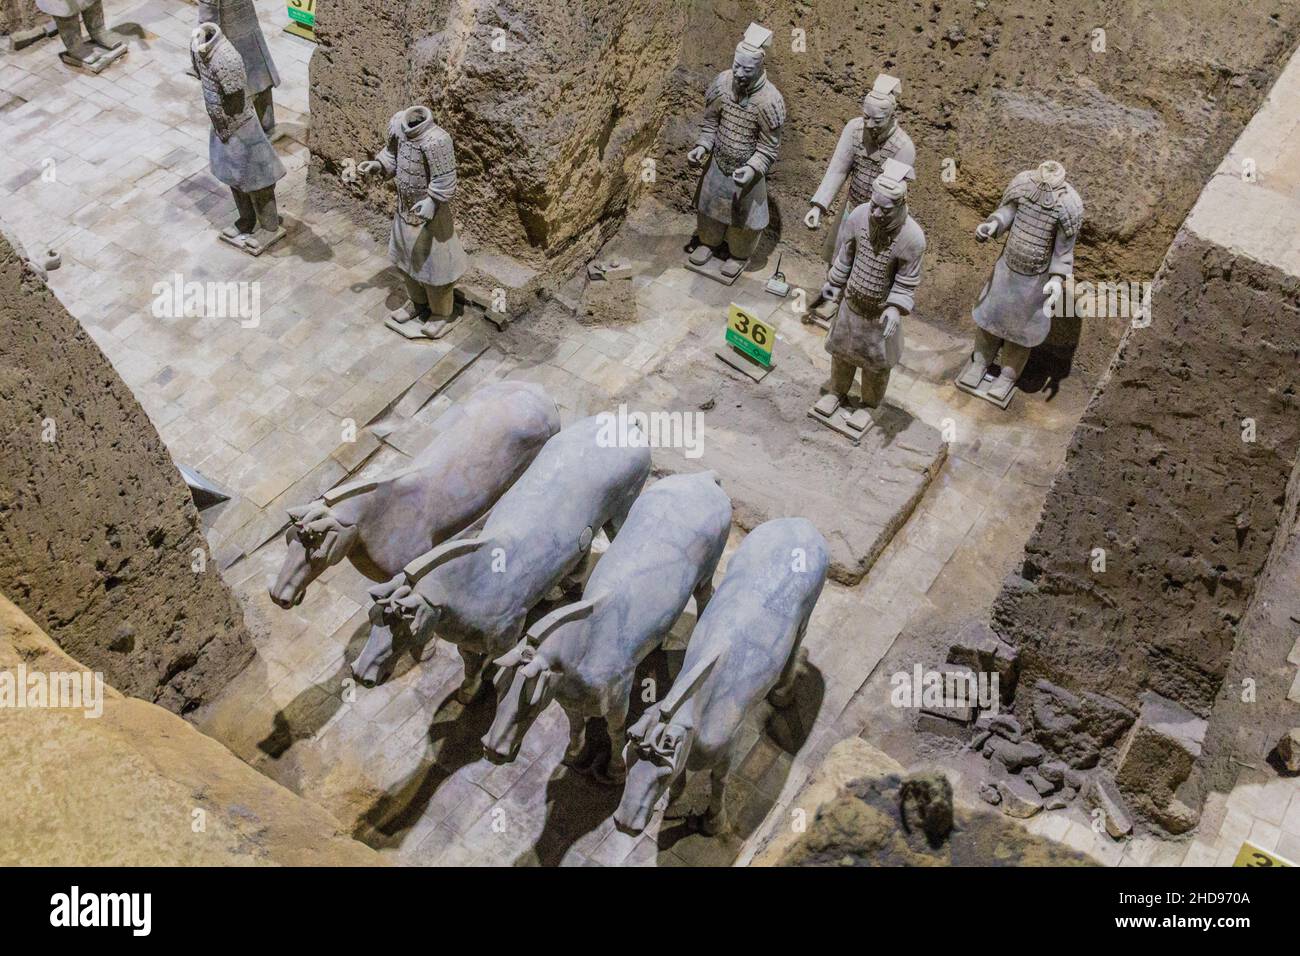 XI'AN, CHINA - AUGUST 6, 2018: Warriors with horses in the Pit 3 of the Army of Terracotta Warriors near Xi'an, Shaanxi province, China Stock Photo